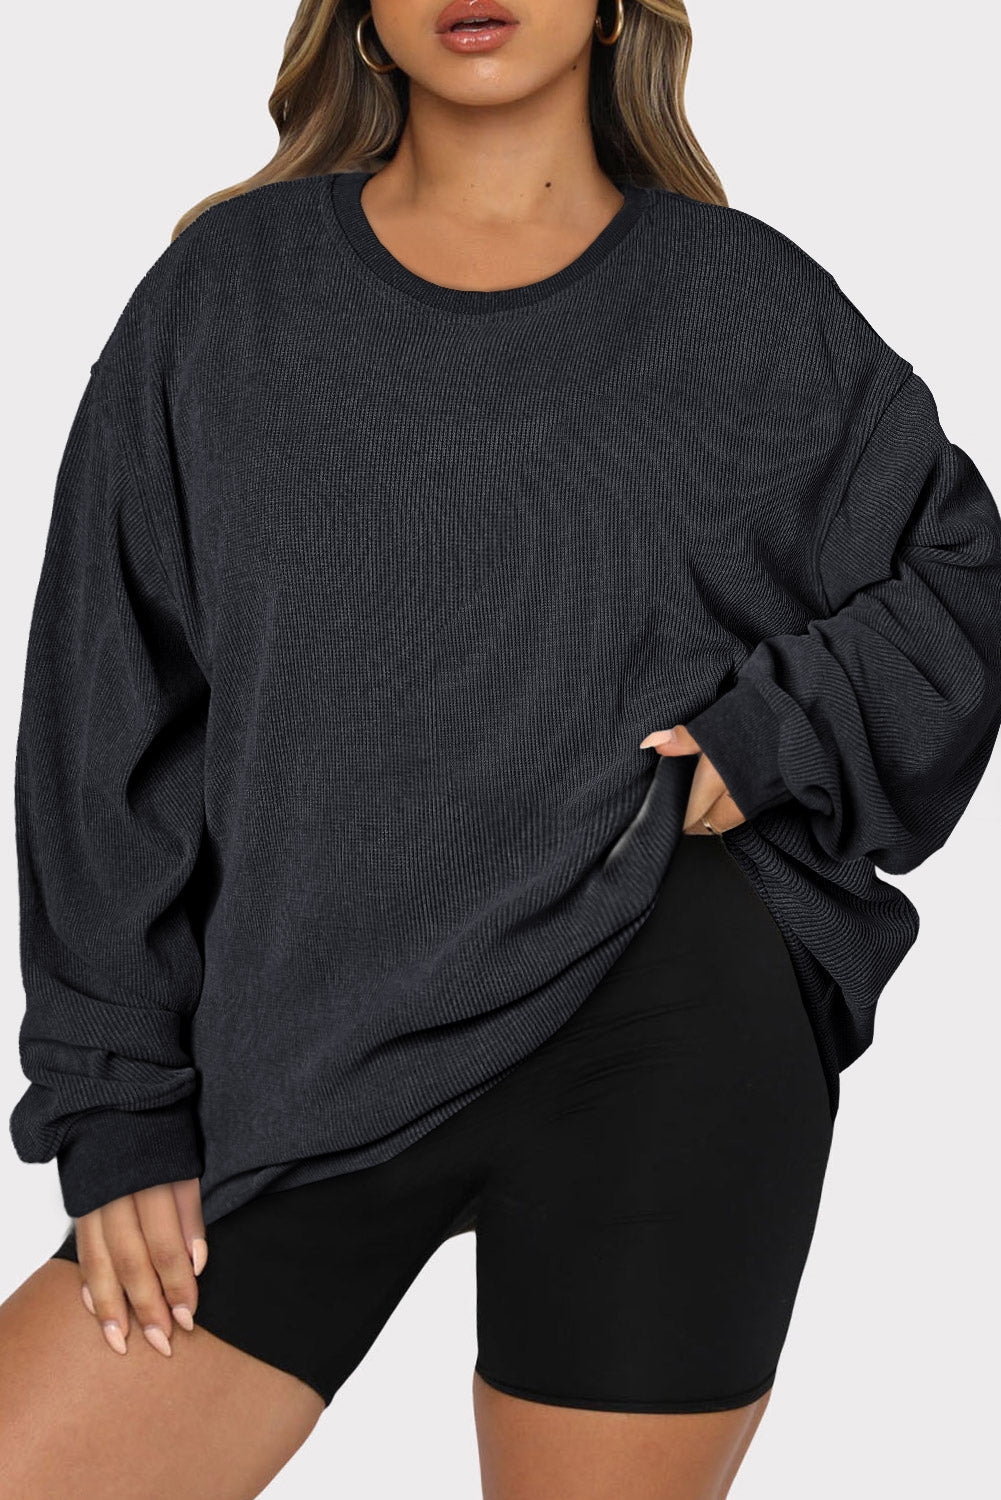 Black solid ribbed knit round neck pullover sweatshirt - 1x / 100% polyester - tops